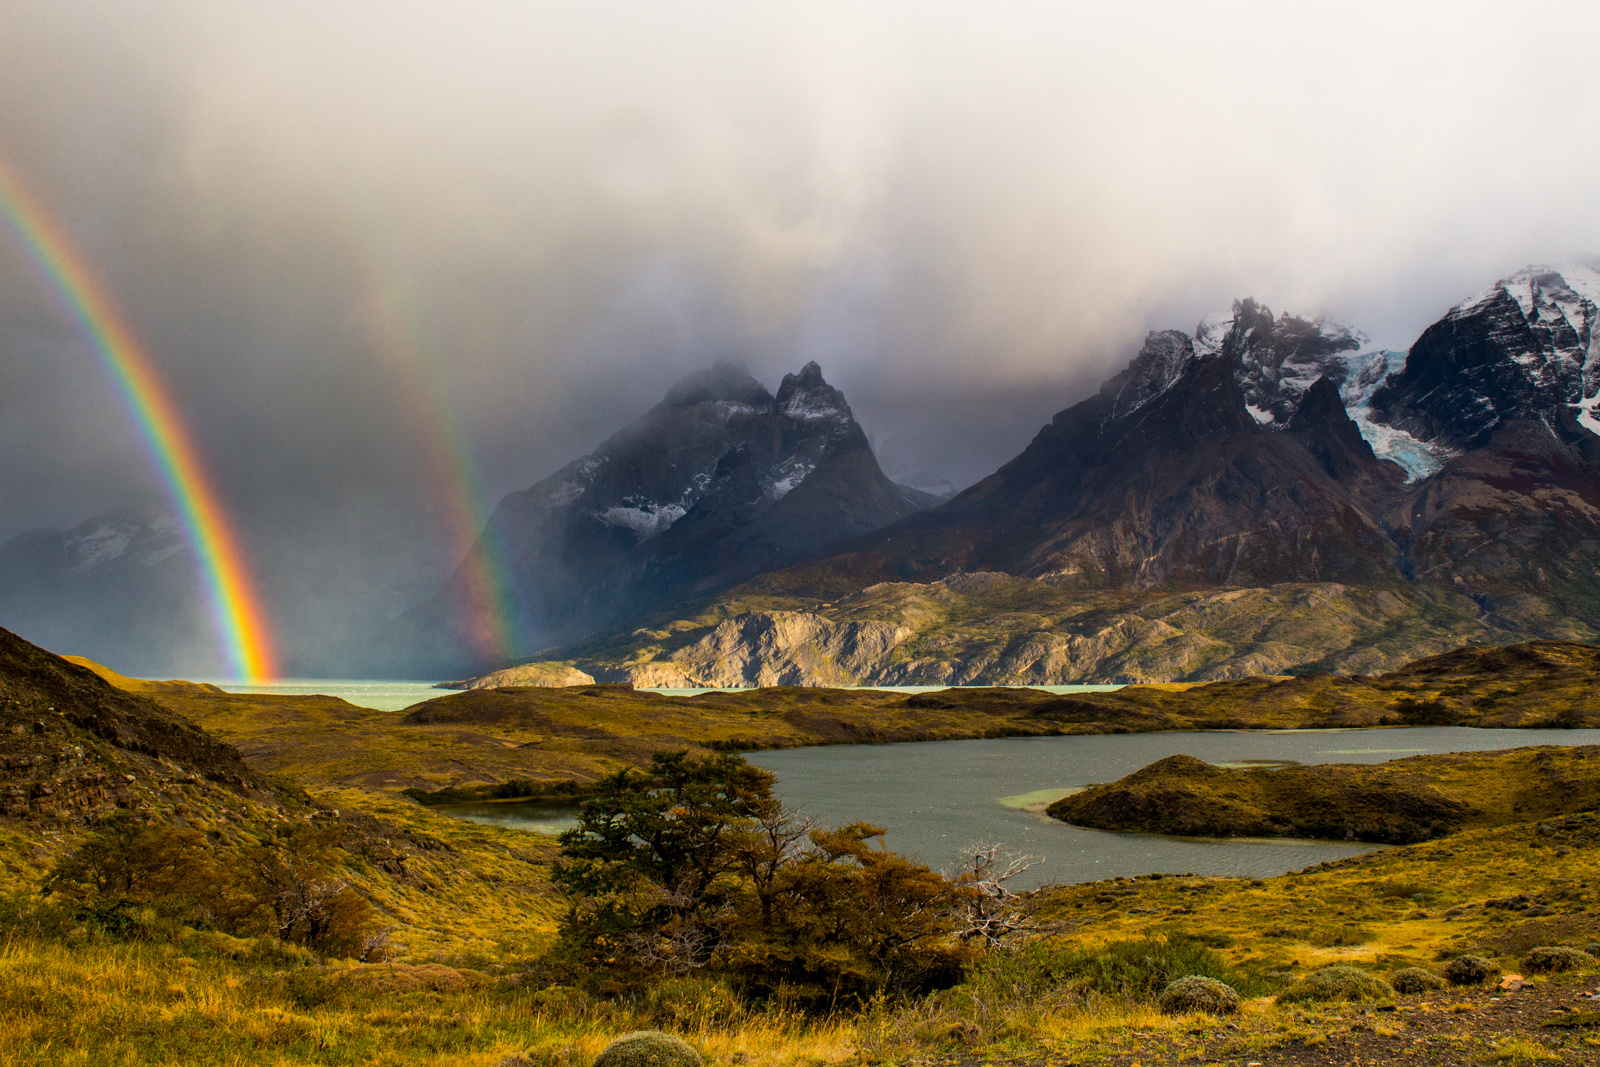 Double rainbow with lakes and mountains, Cuernos del Paine, Torres del Paine National Park, Patagonia, Chile